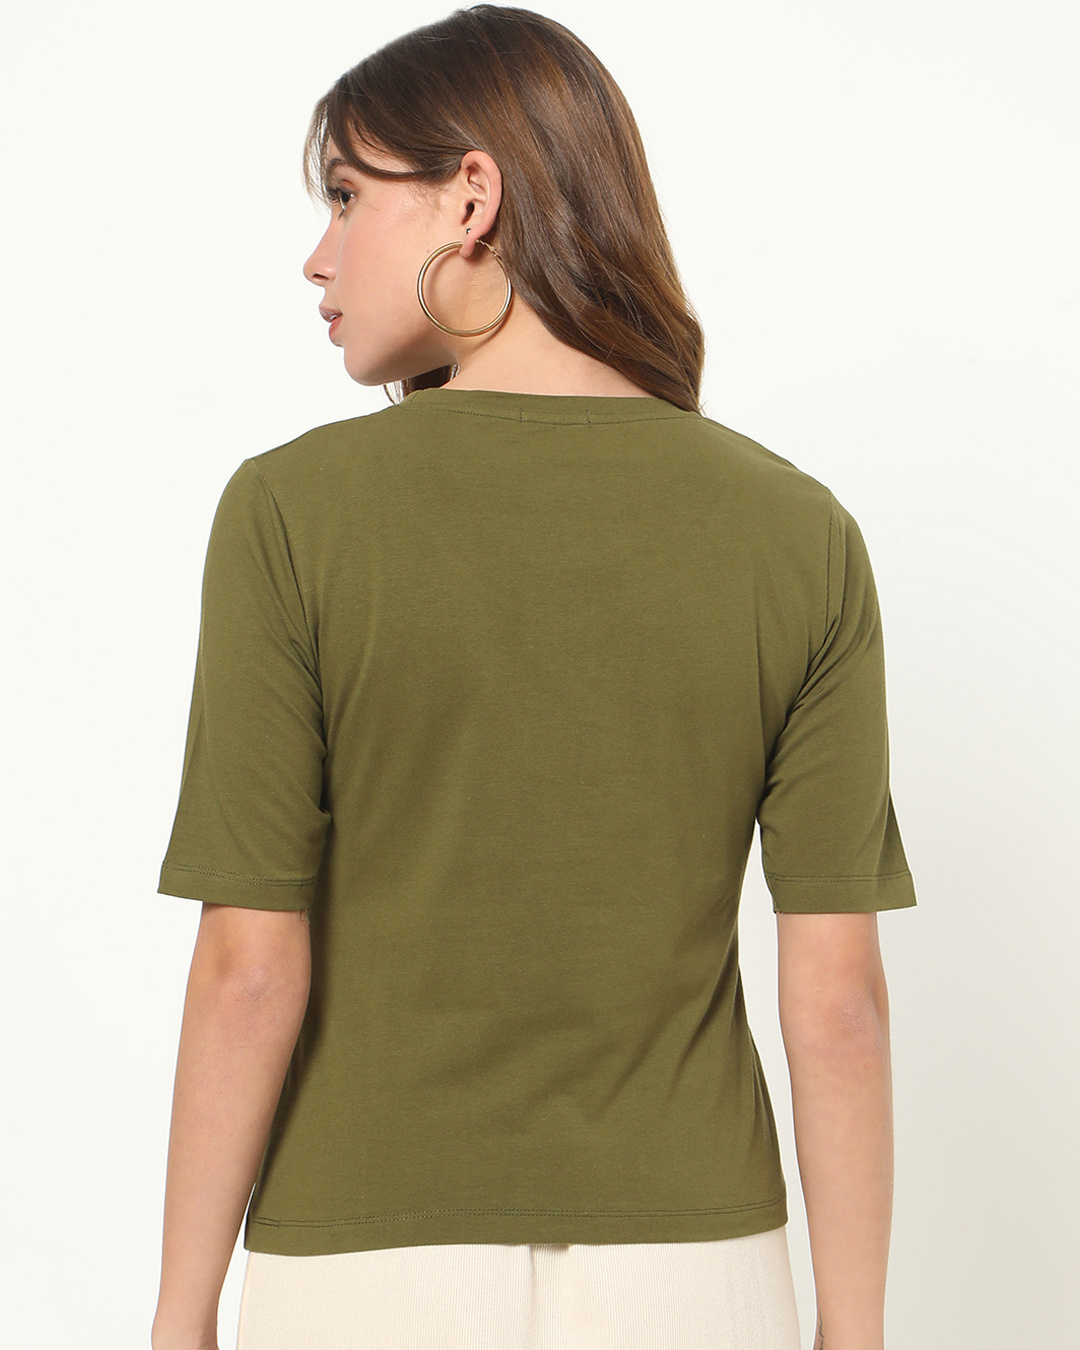 Shop Possibilities Women's Elbow Sleeve Round Neck T-shirt-Back